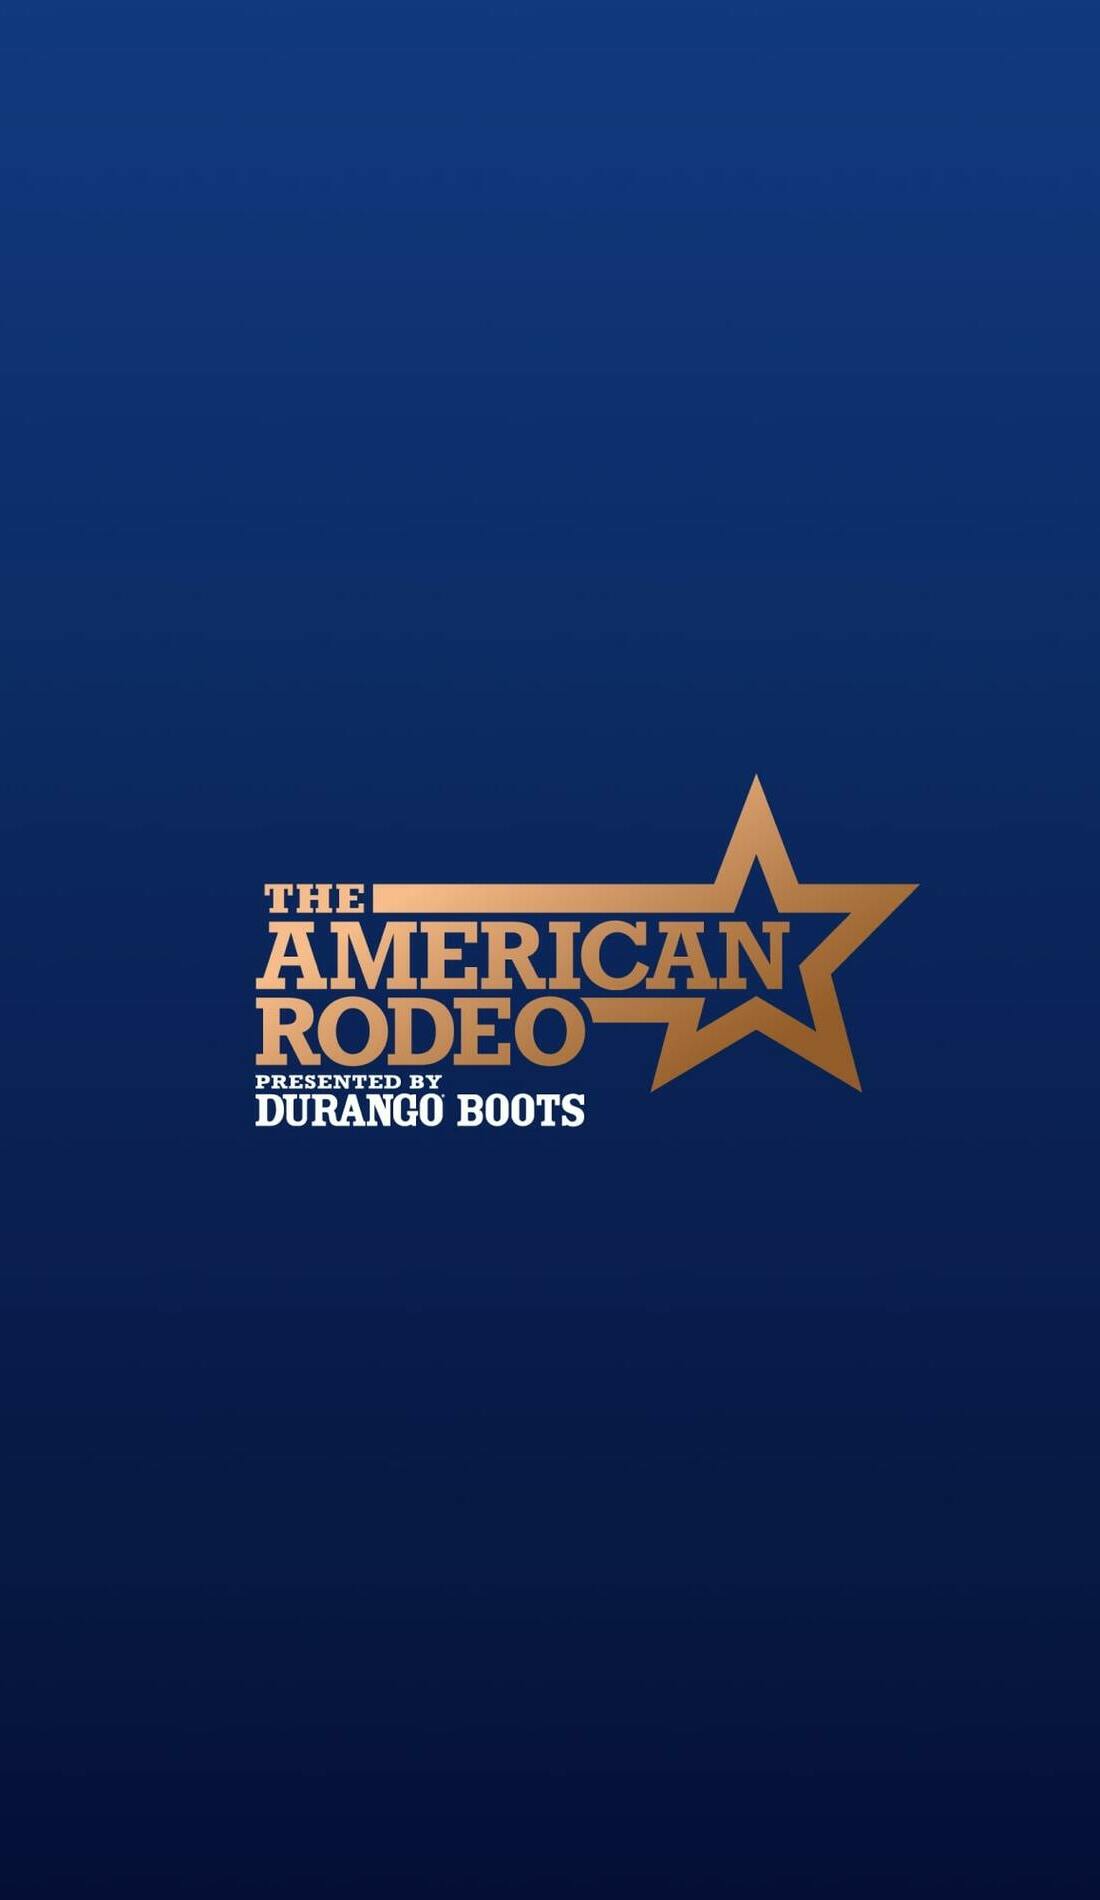 A The American Rodeo live event